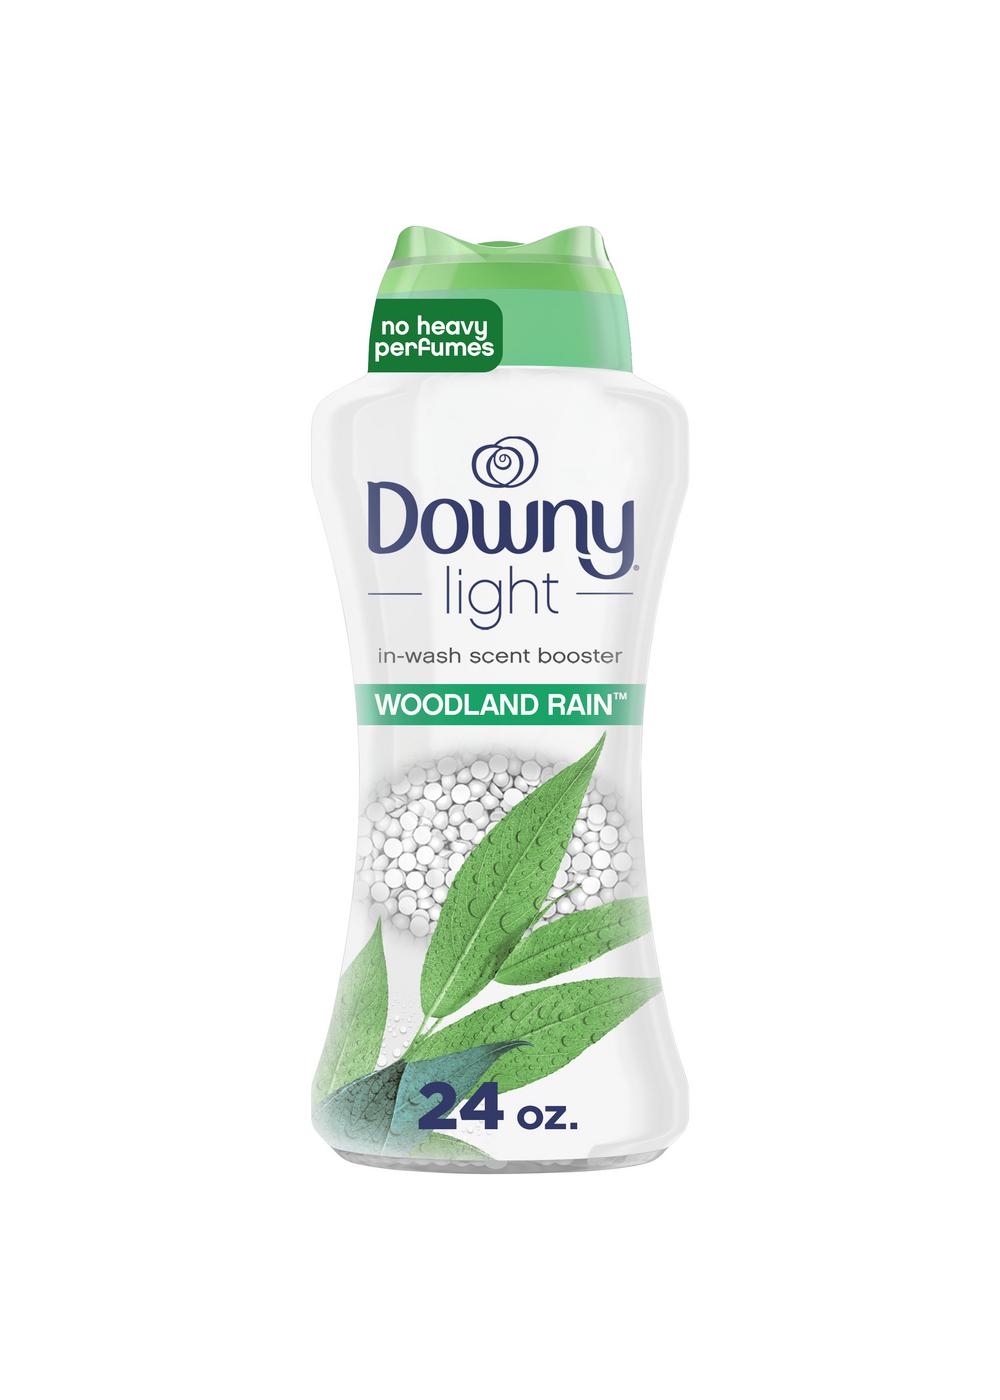 Downy Light In-Wash Scent Booster - Woodland Rain; image 1 of 9